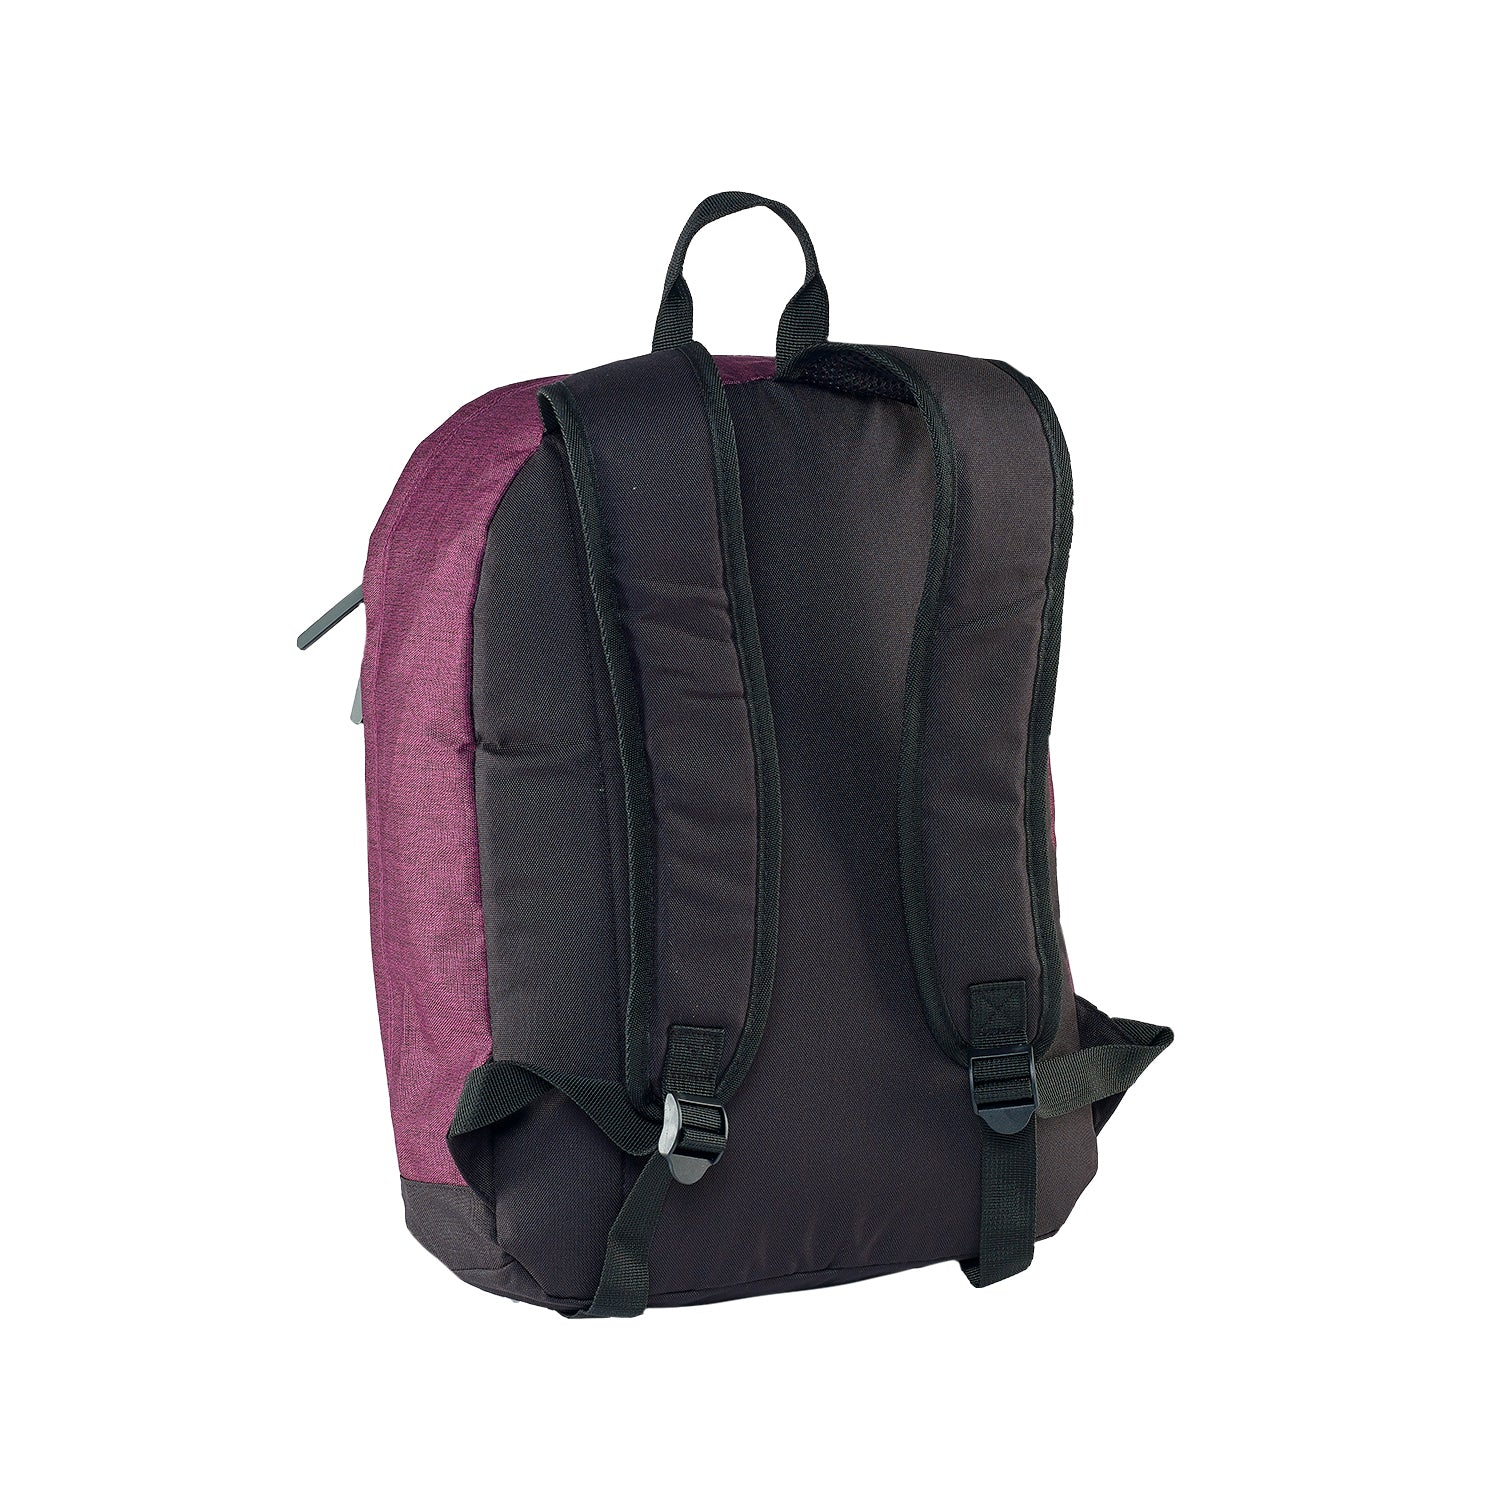 Caribee Campus 2.0 backpack Berry/Black harness